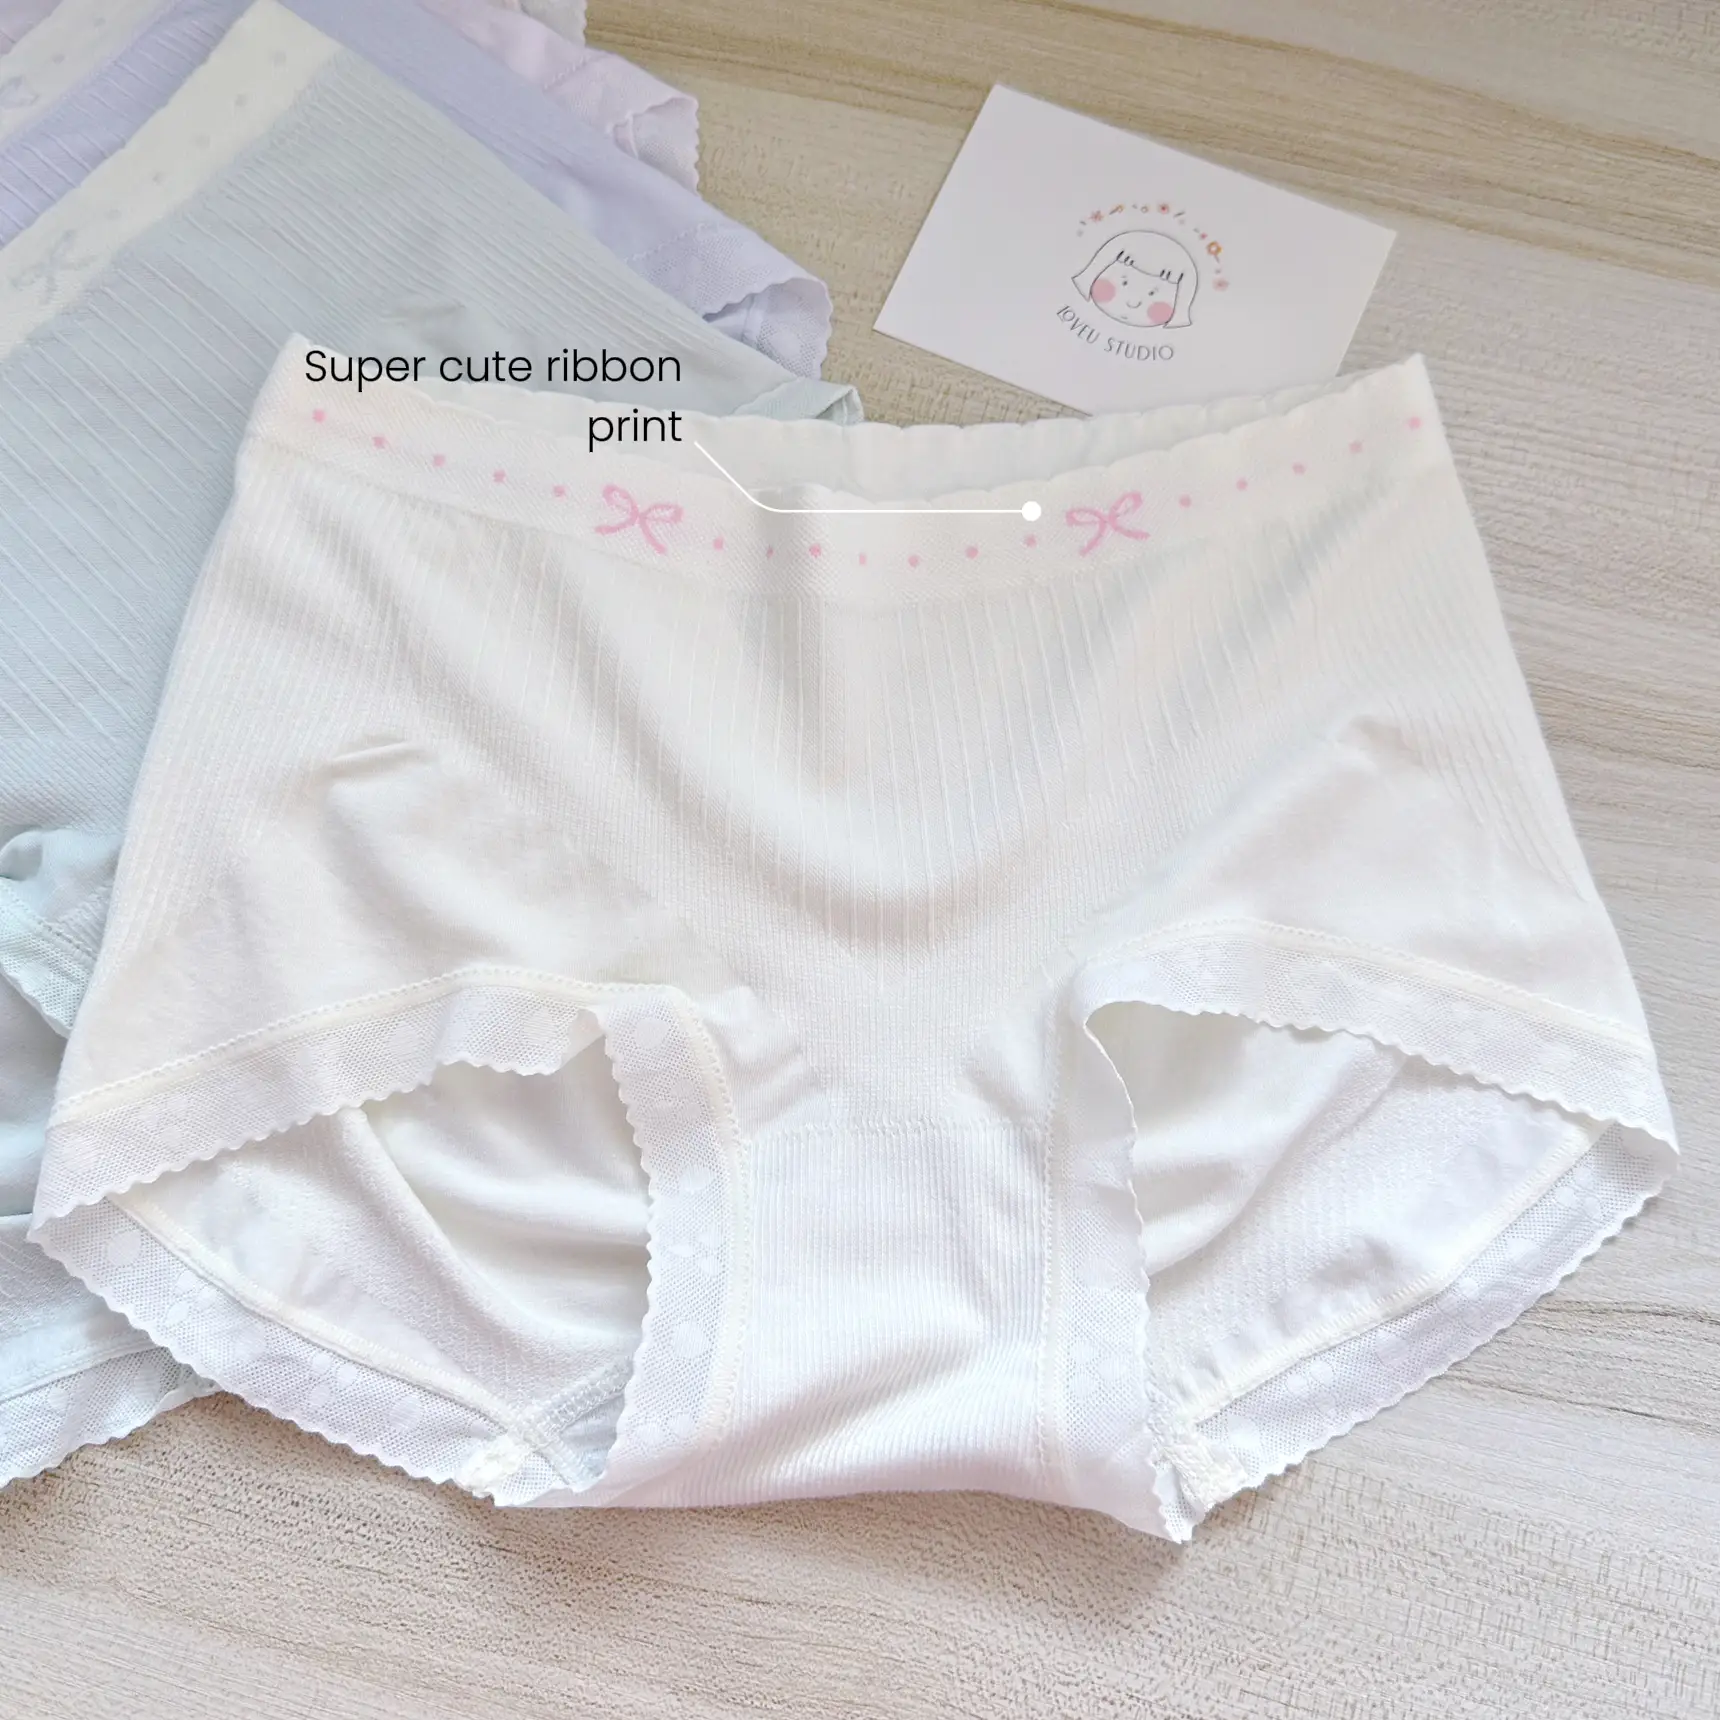 Budget Queen: Seamless undies for only $1 😂, Gallery posted by Rie ☁️